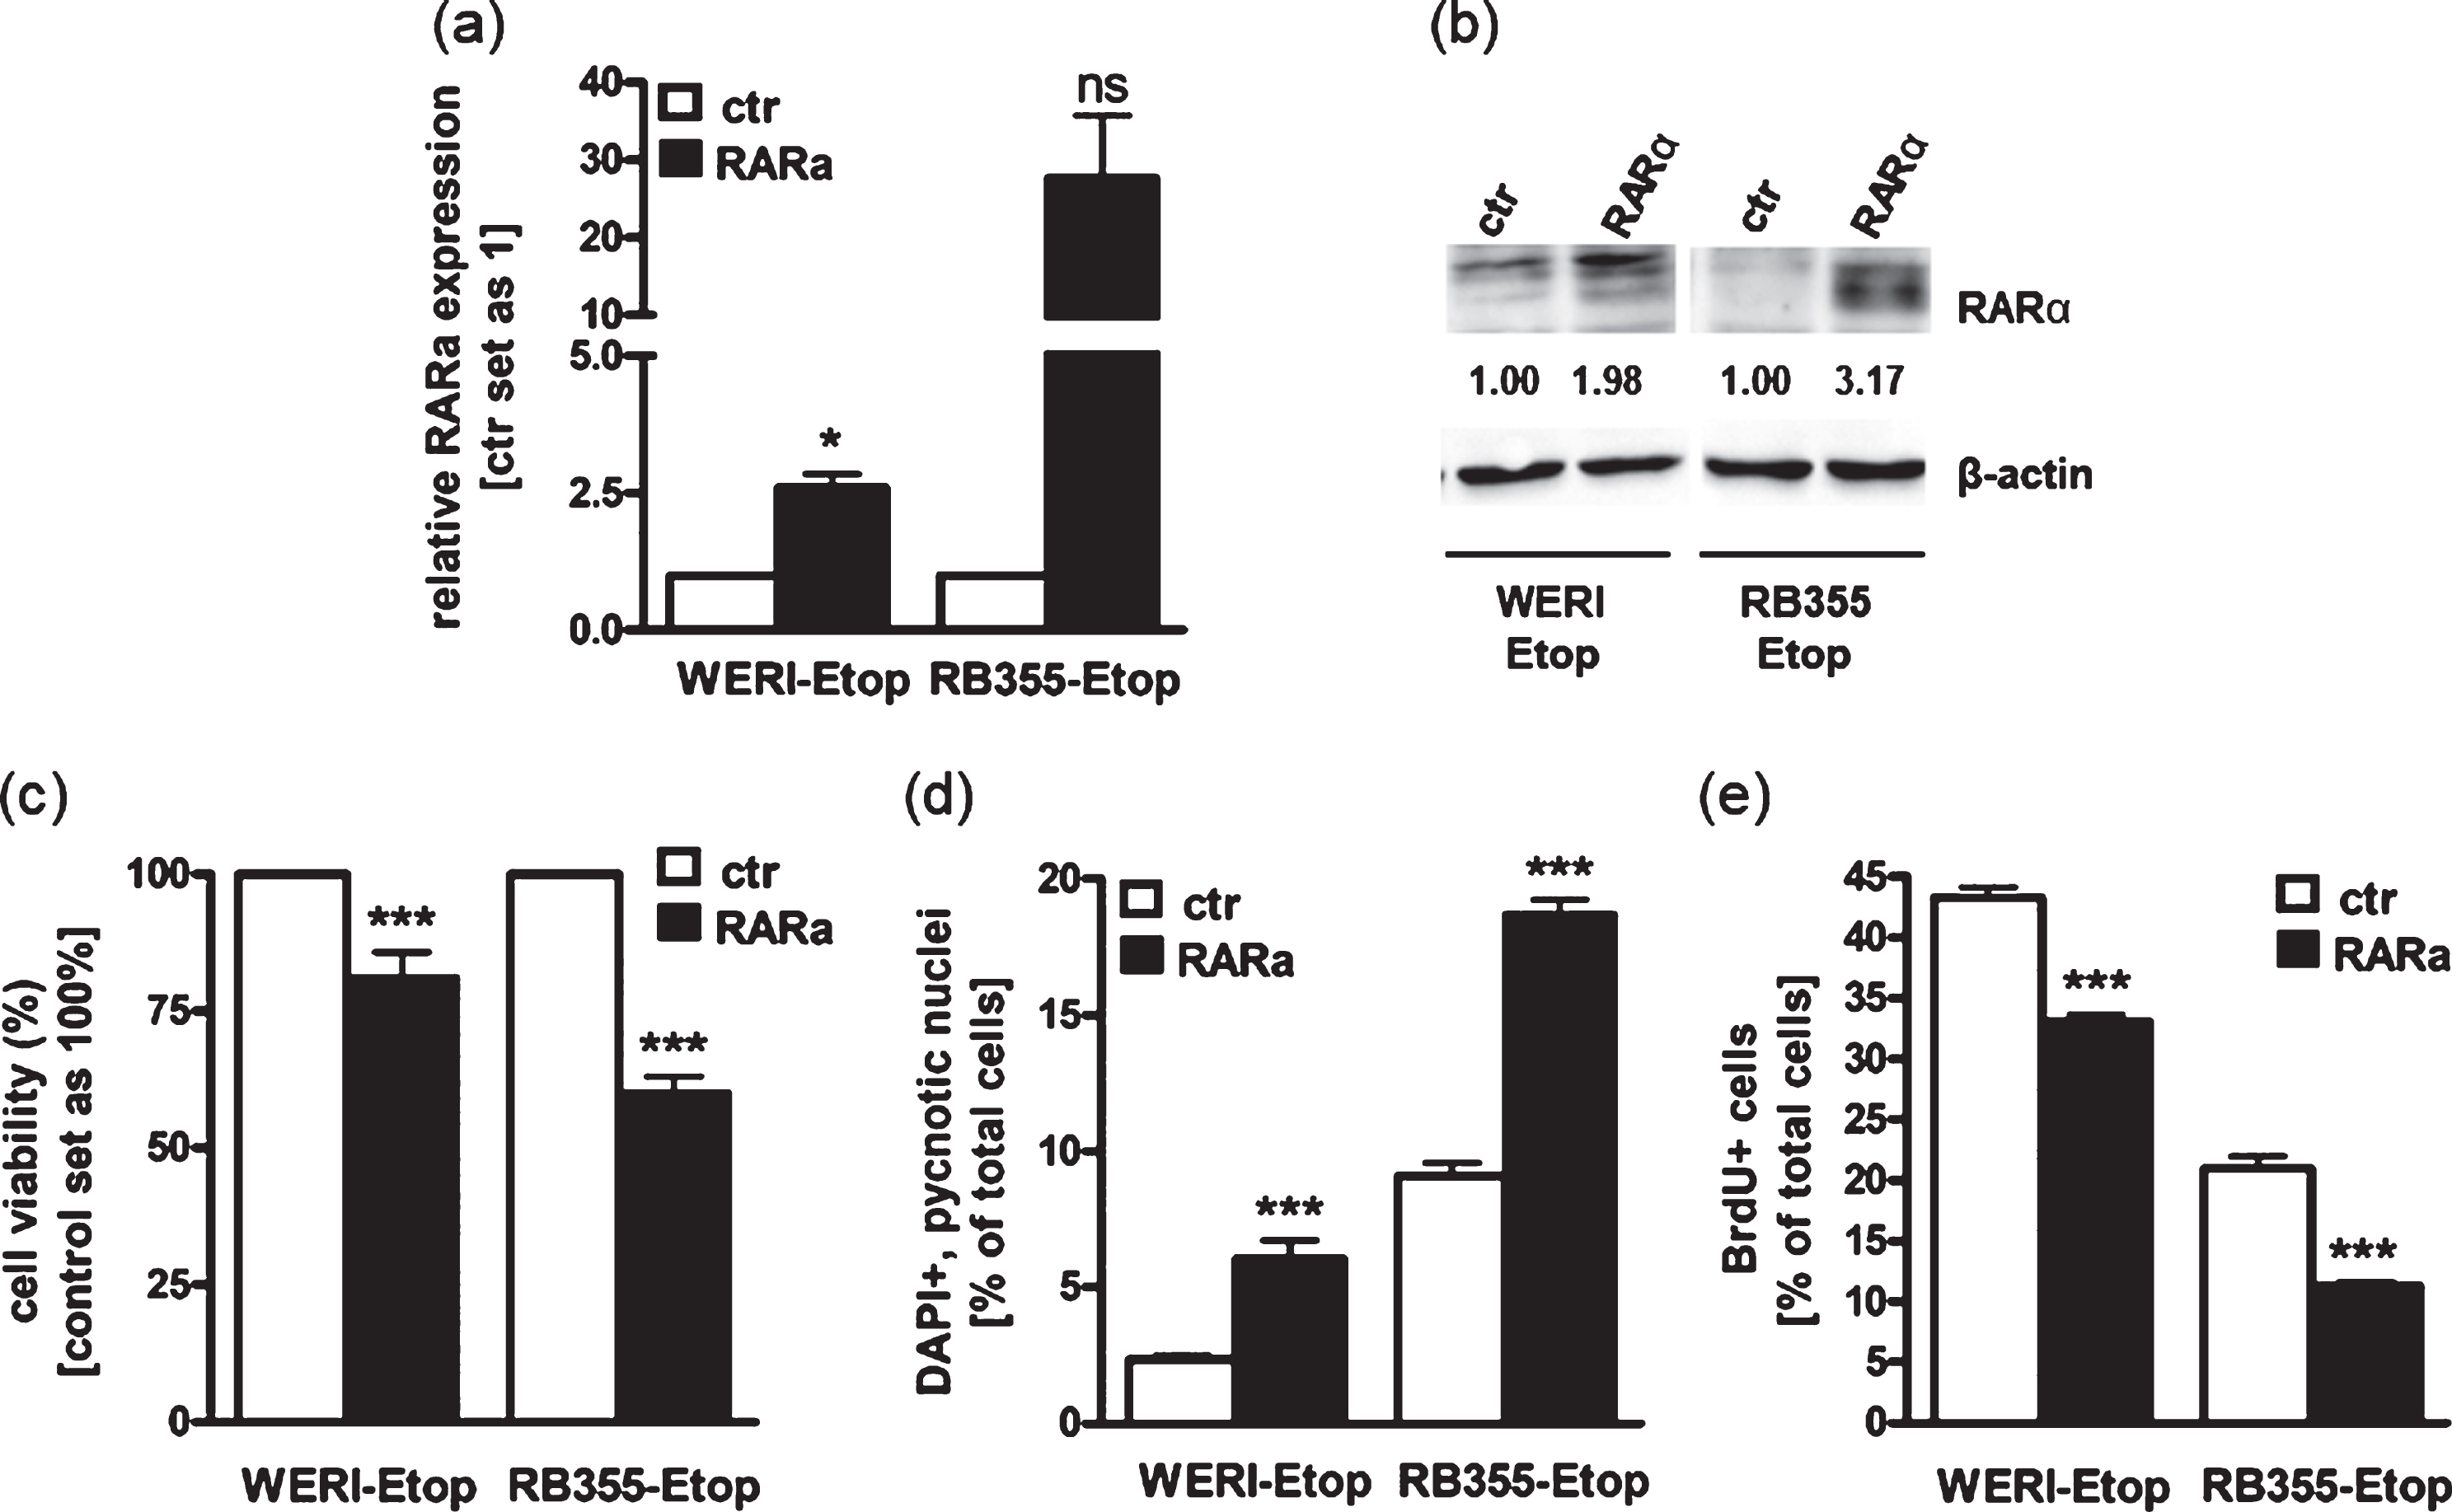 Stable RARα overexpression induces RB apoptosis and lowers proliferation leading to reduced cell viability. (a) Quantitative Real-time PCR analysis of RARα expression levels after stable RARα overexpression in etoposide resistant WERI-Rb1 (WERI-Etop) and RB355 (RB355-Etop) cells compared to the control cells (ctr). (b) Western blot confirmation of RARα overexpression using total cell lysates from etoposide resistant WERI-Rb1 (WERI-Etop) and RB355 (RB355-Etop) cells or the control cells (ctr). Beta-Actin (β-actin) was used as loading control. (c)-(e) Stably RARα overexpressing WERI-Etop and RB355-Etop RB cells (RARα) displayed significantly reduced cell viability, significantly induced apoptosis and reduced proliferation rates compared to control cells (ctr) as revealed by WST-1 assay (c), DAPI cell counts (d) and BrdU stains (e). Values are means from at least 3 independent experiments±SEM. *P-value < 0.05; ***P-value < 0.001; statistical differences compared to the control group calculated by Student’s t-test.